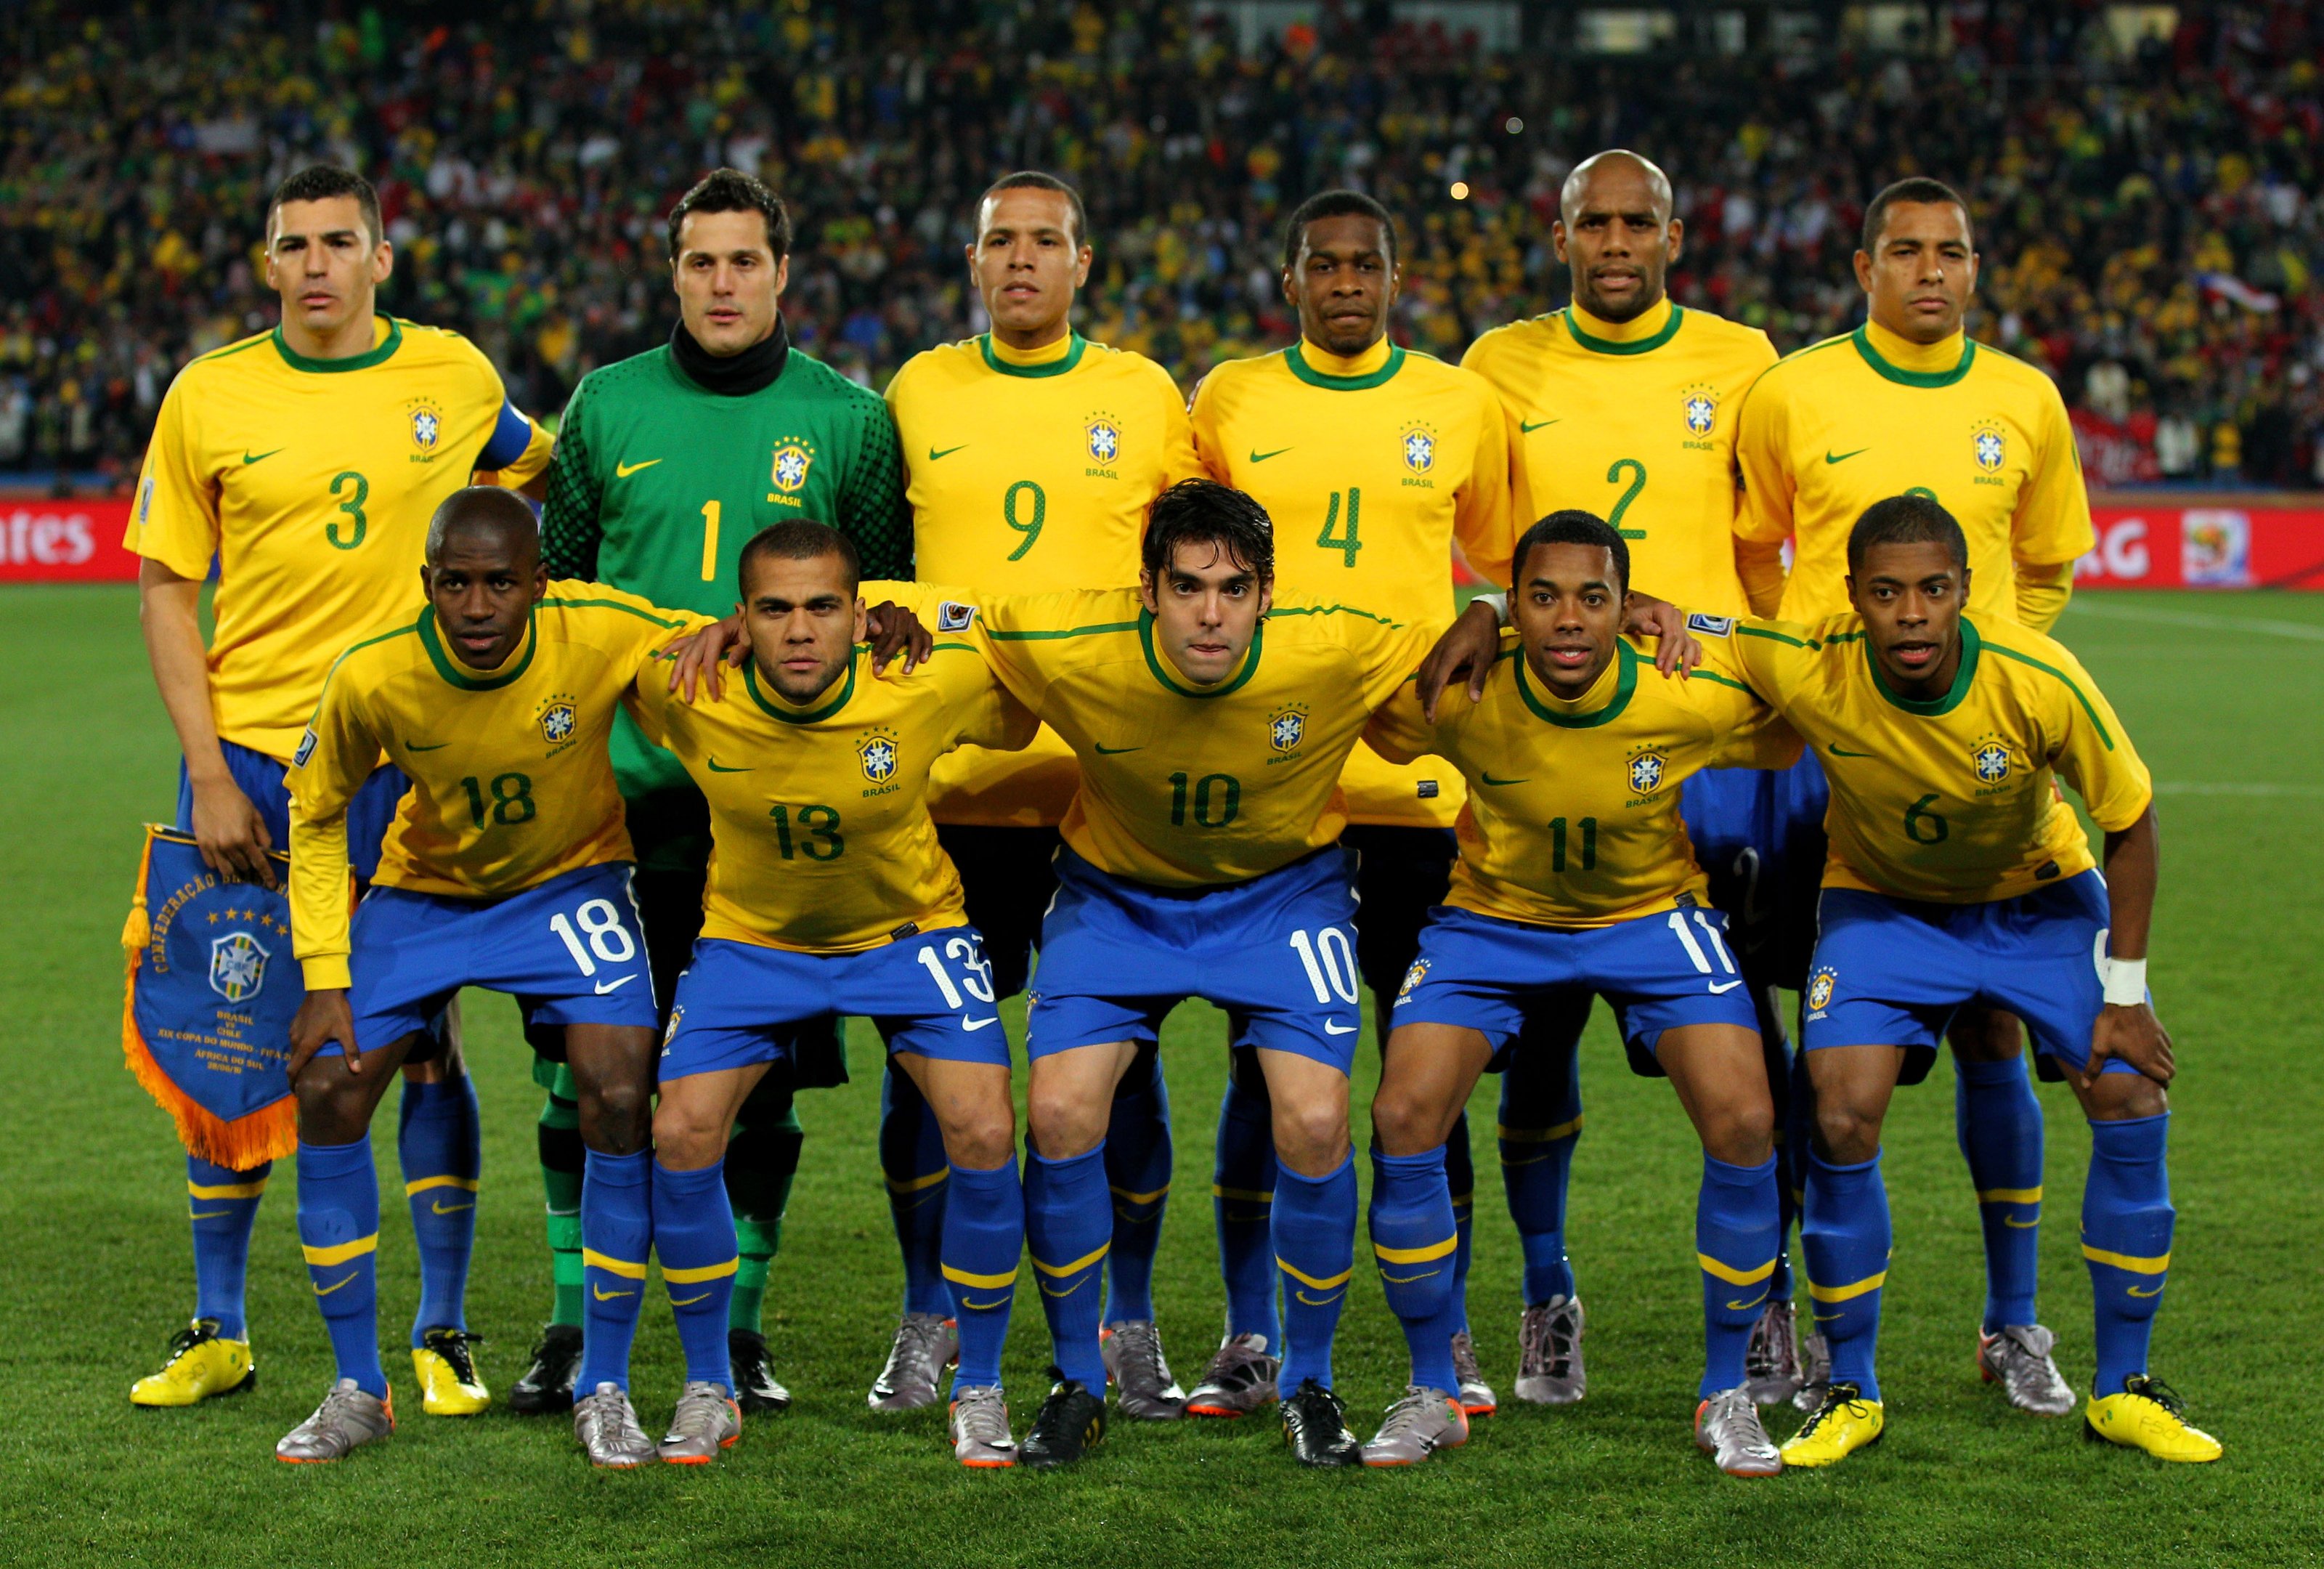 JOHANNESBURG, SOUTH AFRICA - JUNE 28:  The Brazil team line up ahead of the 2010 FIFA World Cup South Africa Round of Sixteen match between Brazil and Chile at Ellis Park Stadium on June 28, 2010 in Johannesburg, South Africa.  (Photo by Cameron Spencer/Getty Images)